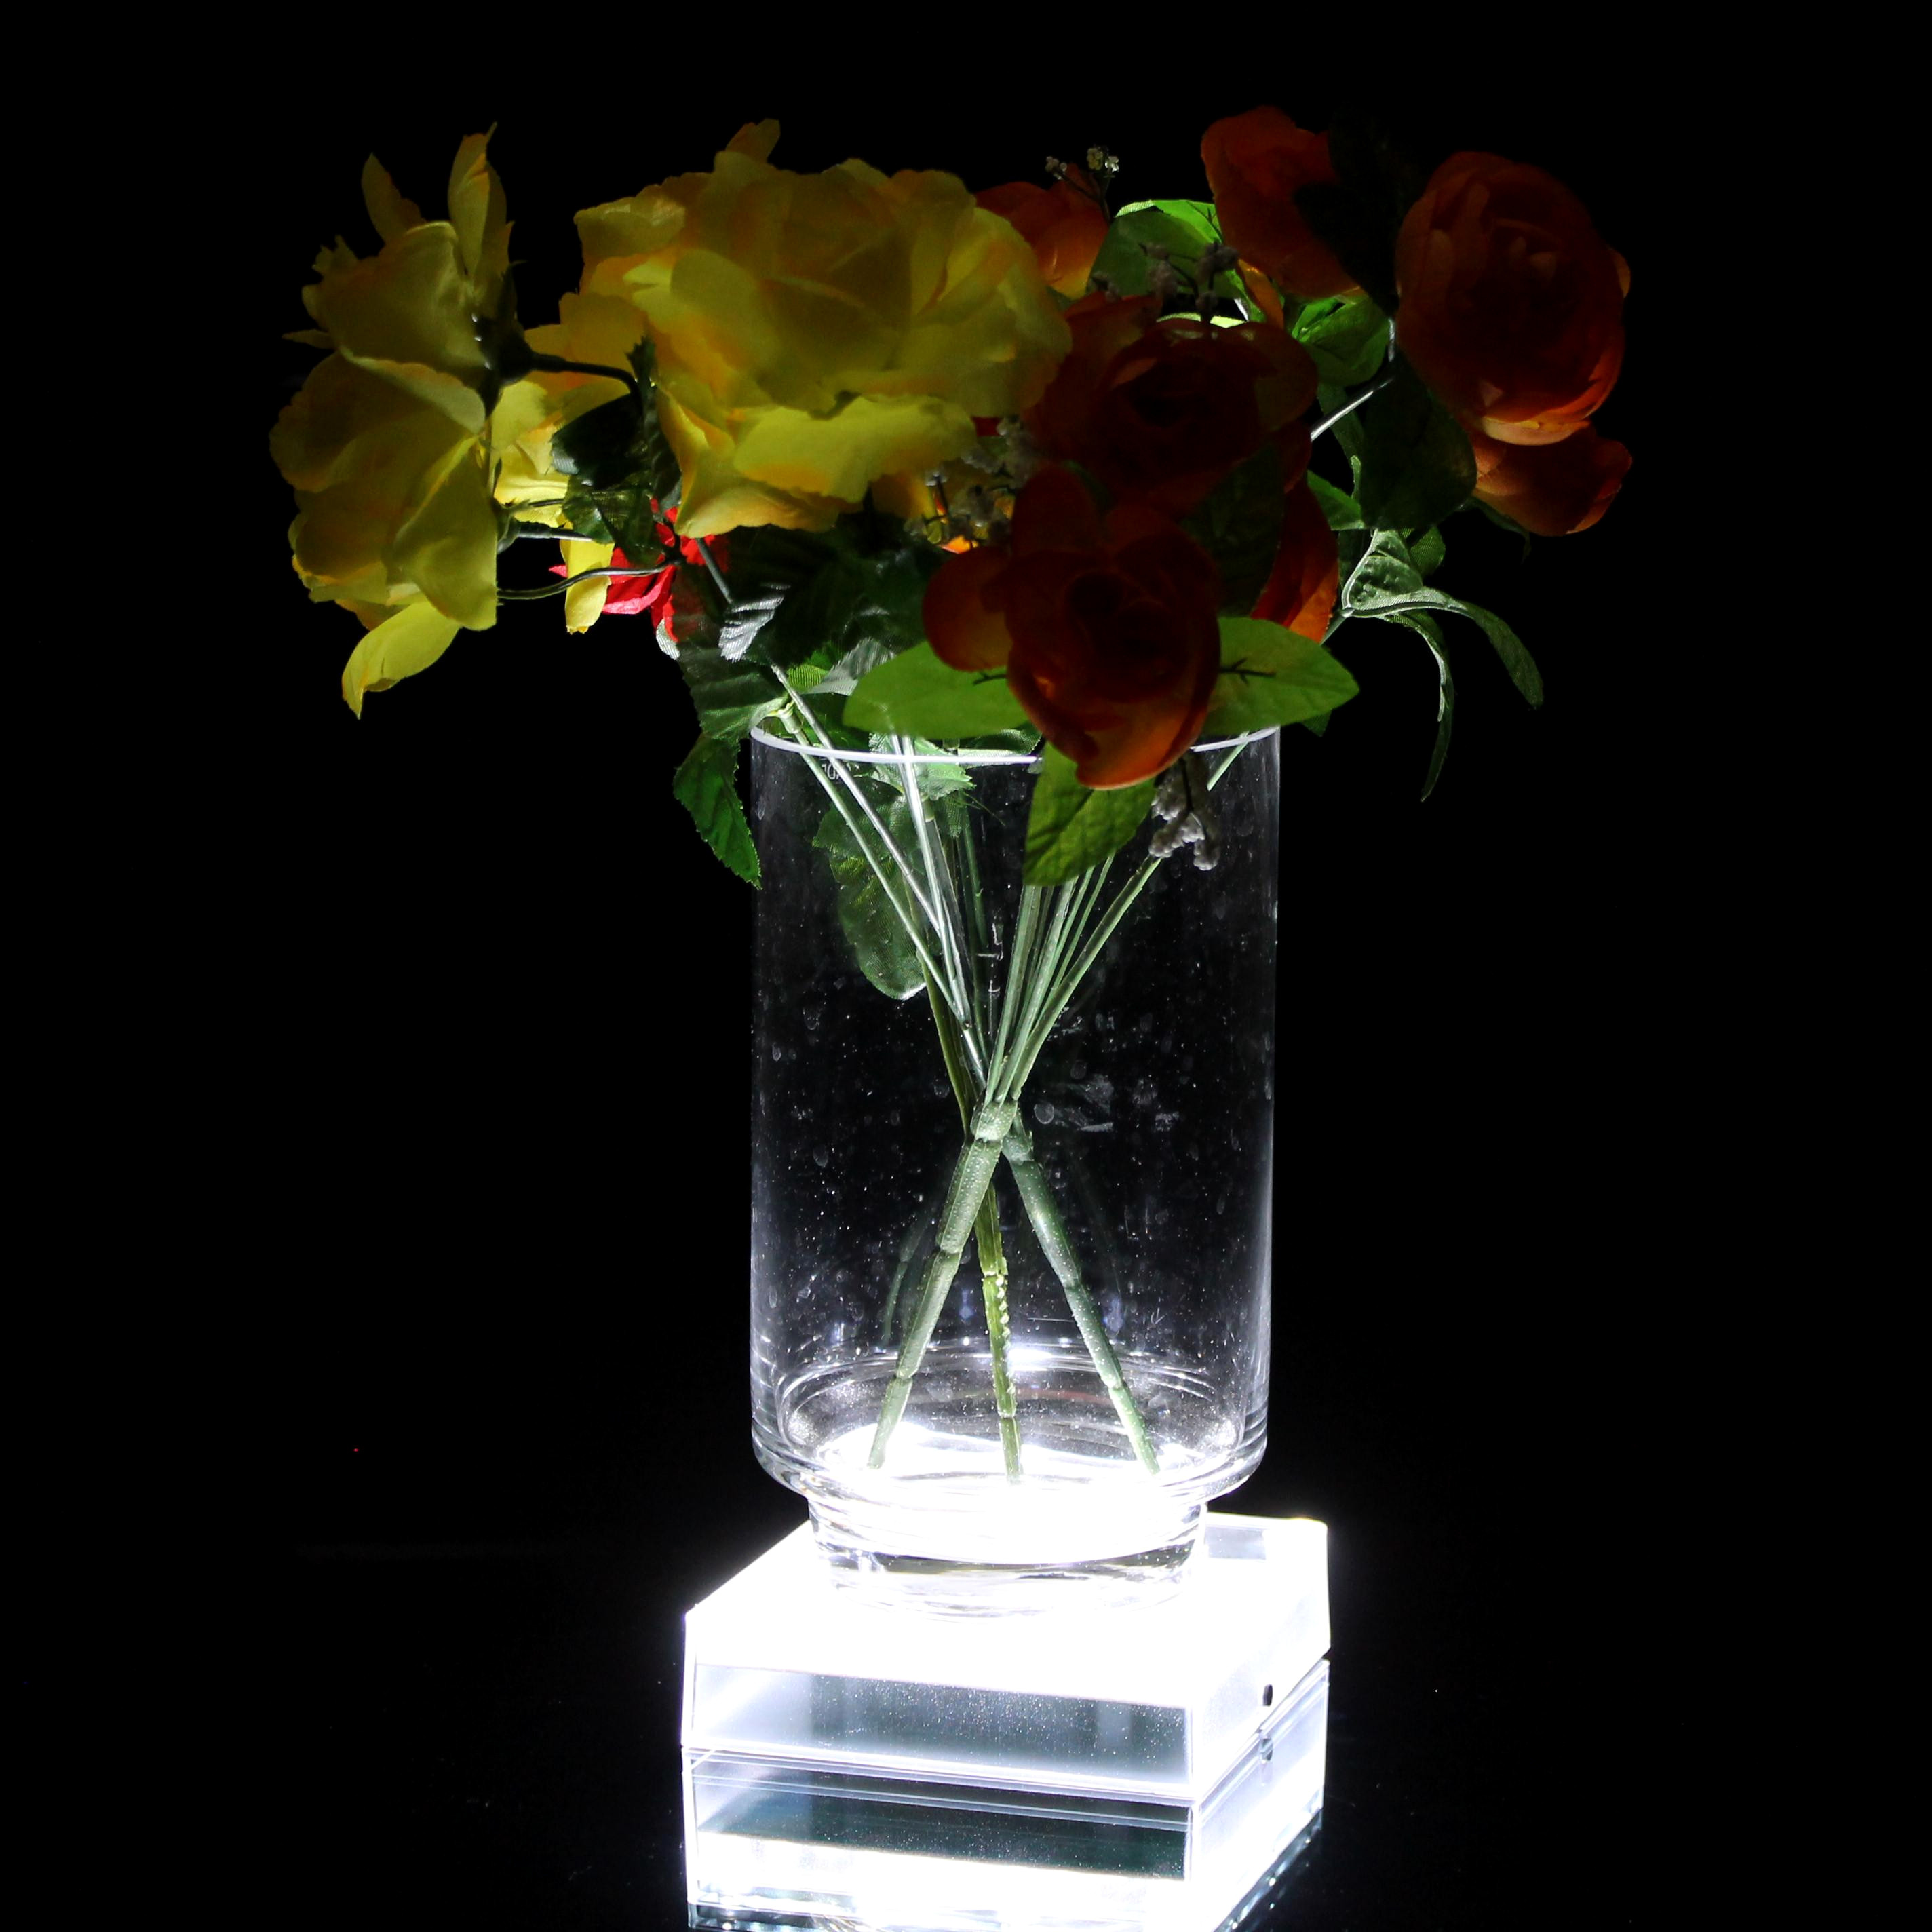 12 Recommended Small Vases for Wedding Centerpieces 2024 free download small vases for wedding centerpieces of wedding flower decorations awesome living room square flower vases within living room square flower vases inspirational h vases bud vase